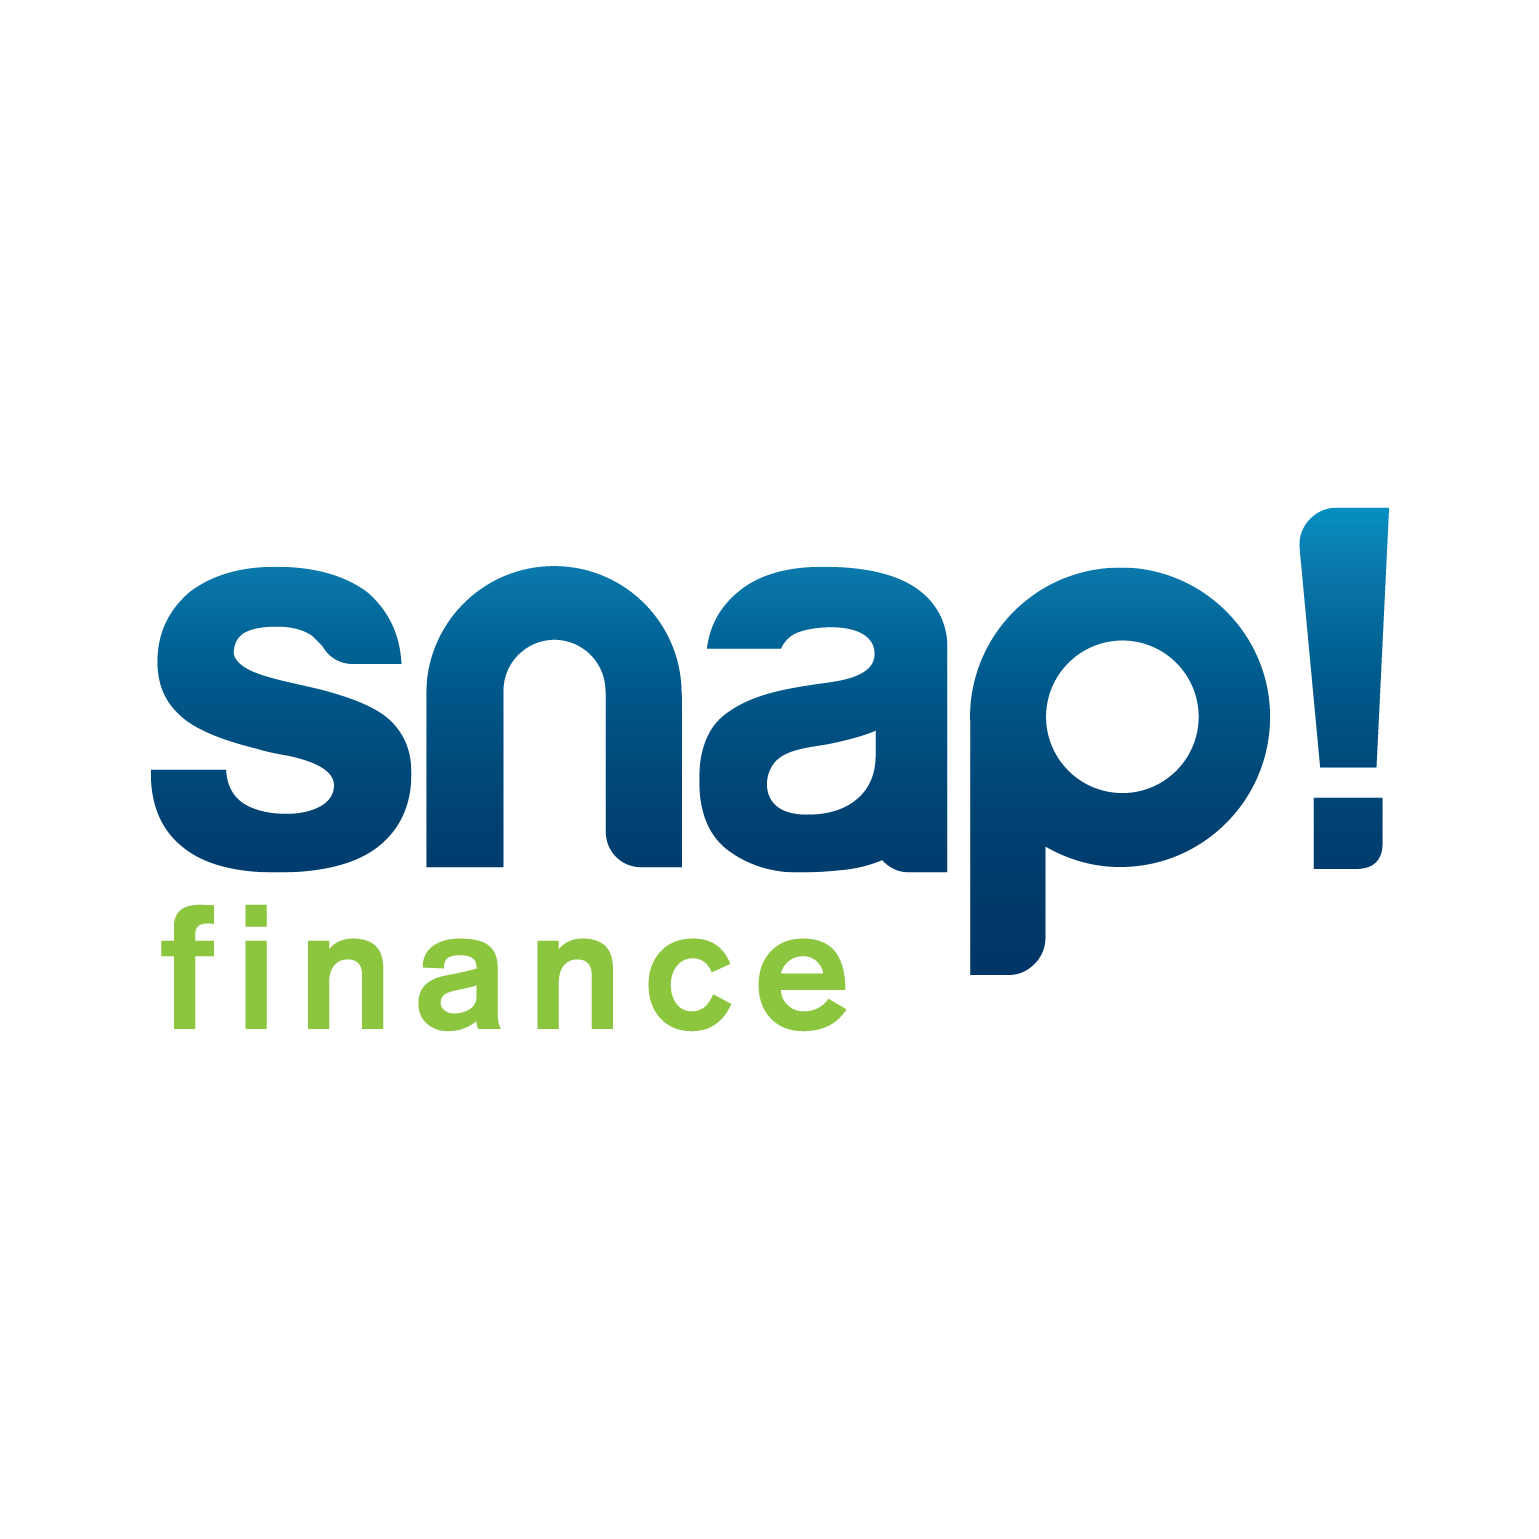 online stores that accept snap finance